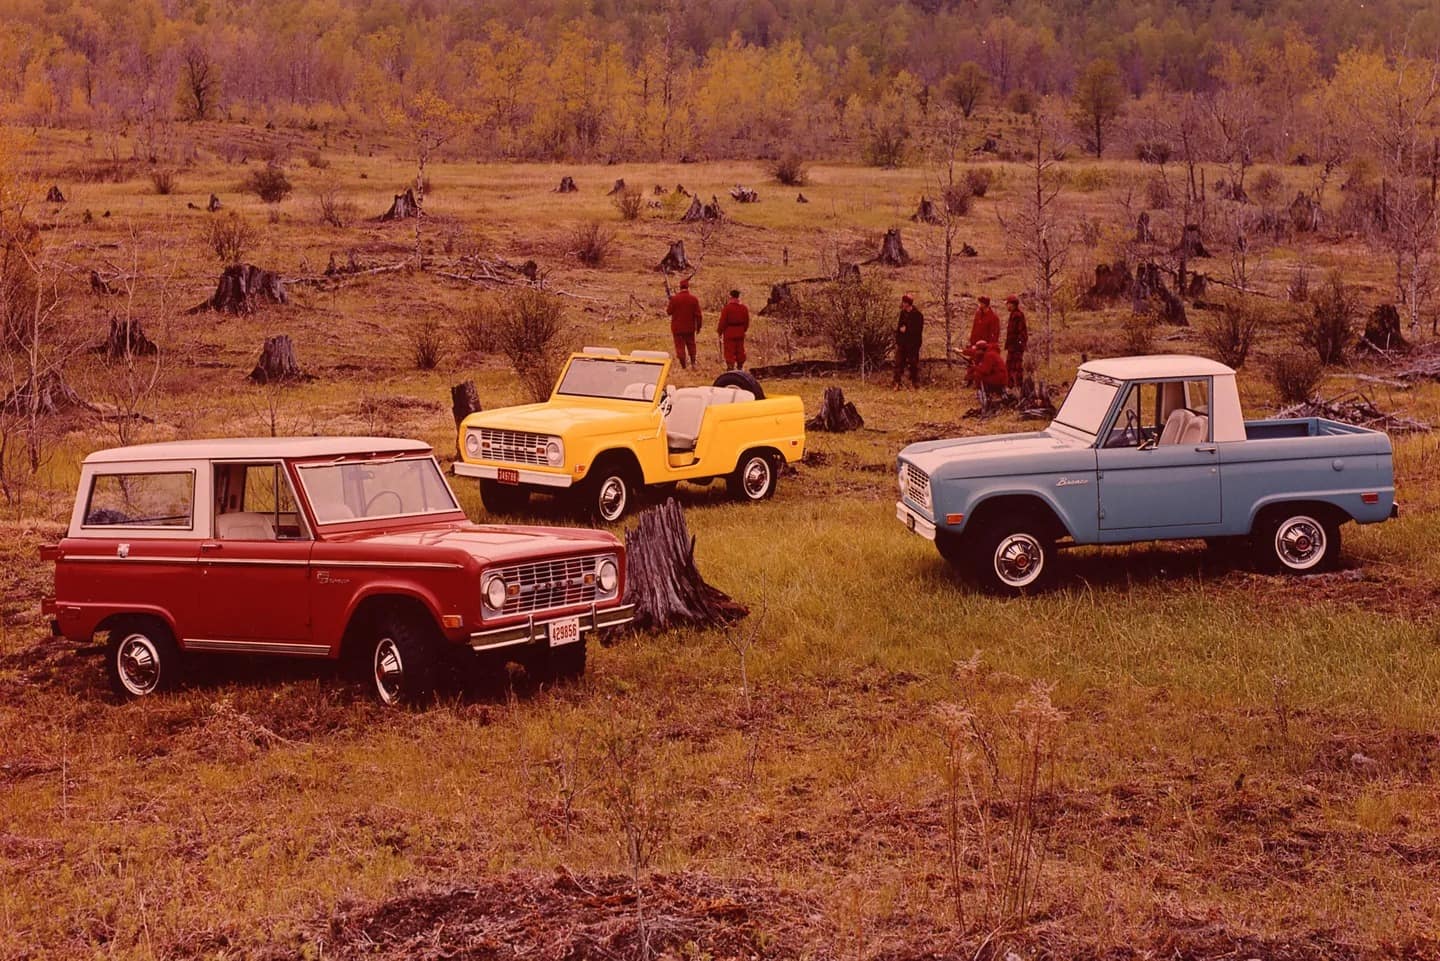 1969 Ford Bronco Sport Wagon in Royal Maroon with Wimbledon White roof, 1969 Ford Bronco roadster in Empire Yellow, 1969 Ford Bronco pickup in Skyview Blue with Wimbledon White roof.